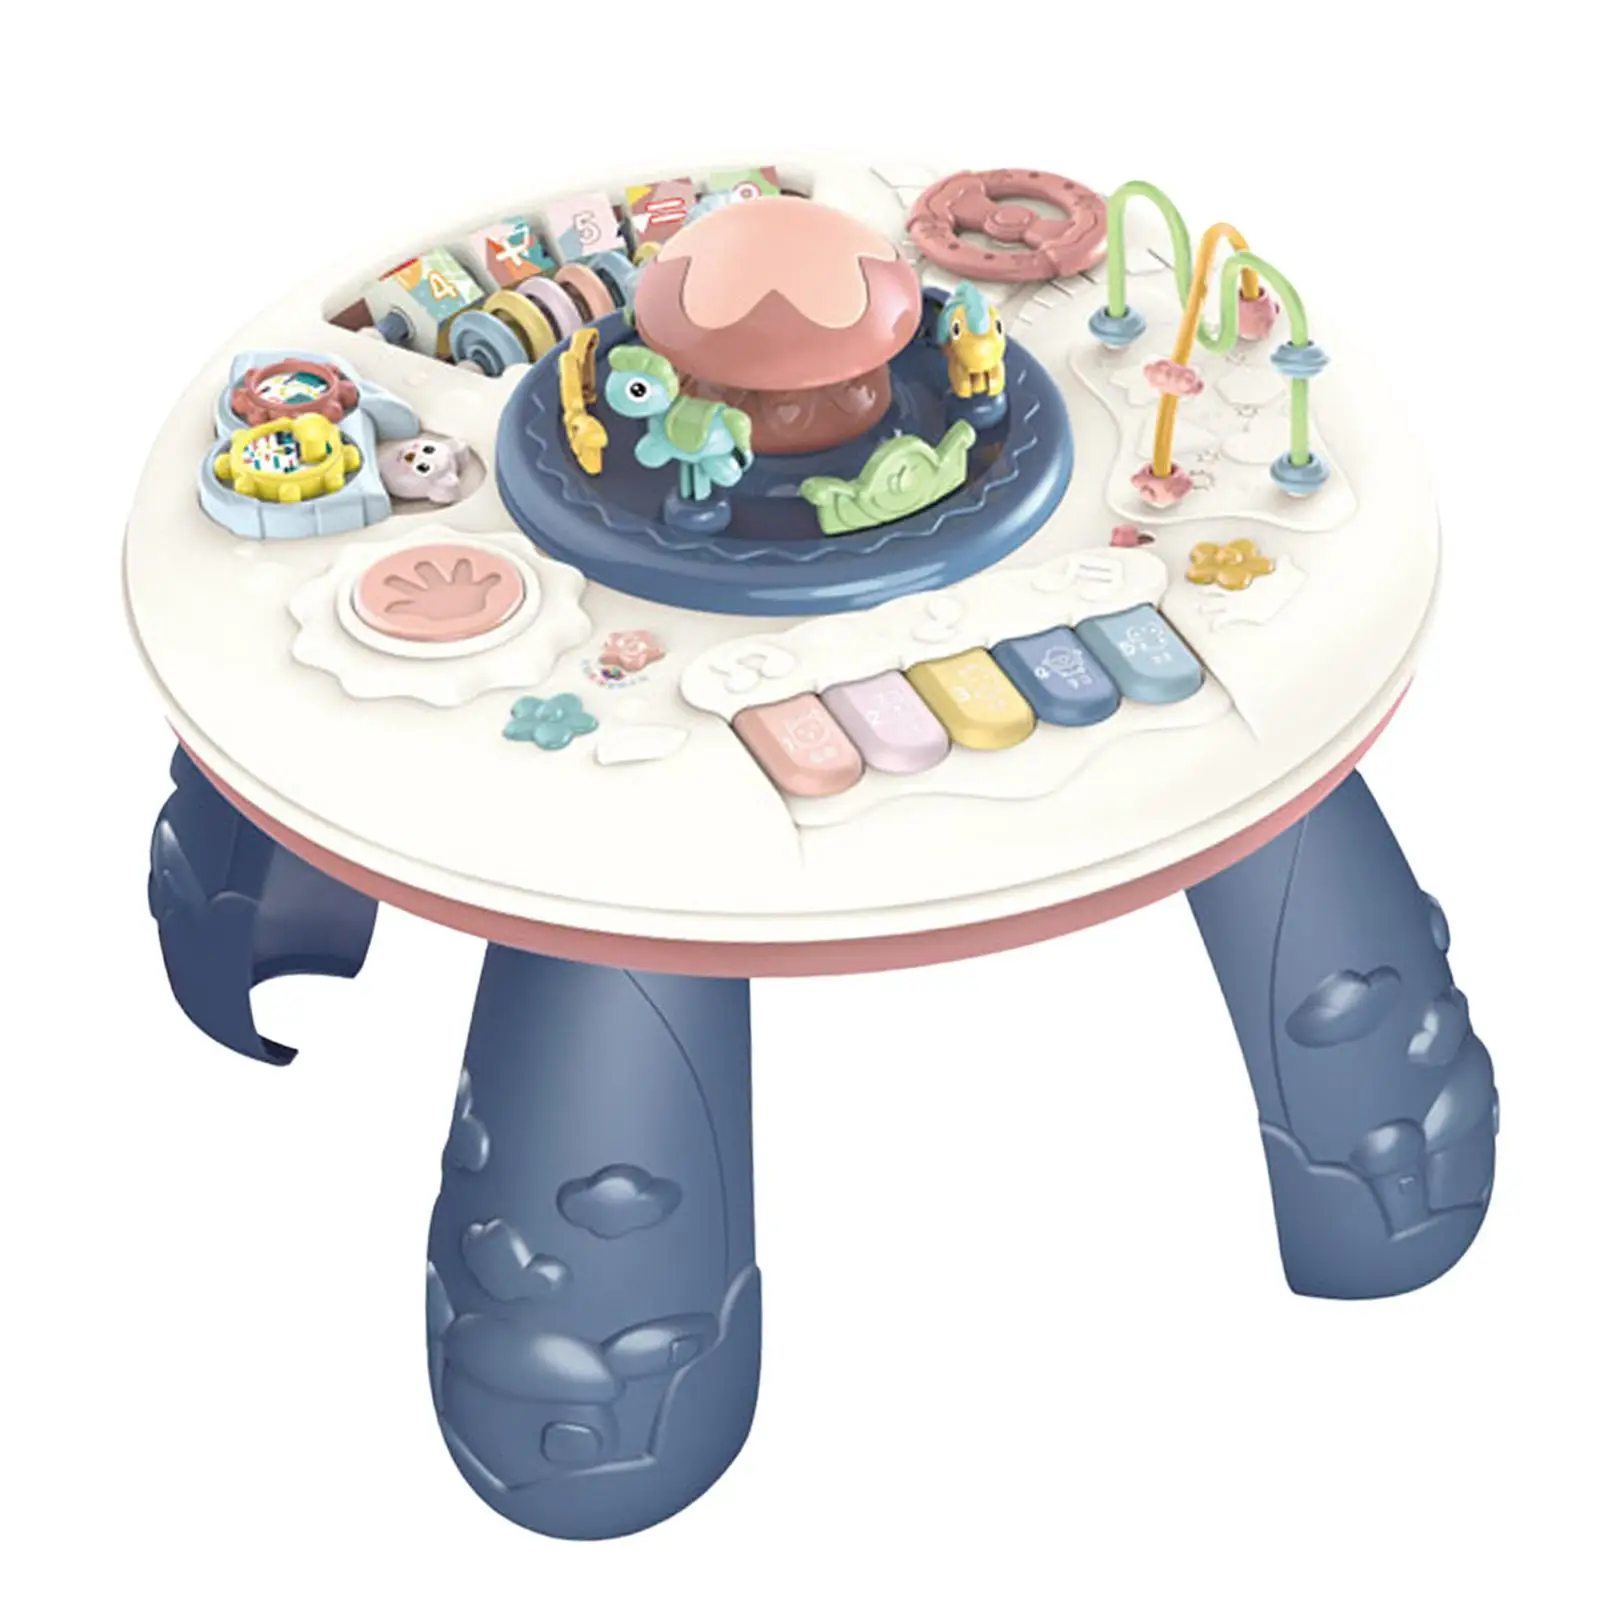 Portable Musical Learning Activity Table Cute Early Development for Kids